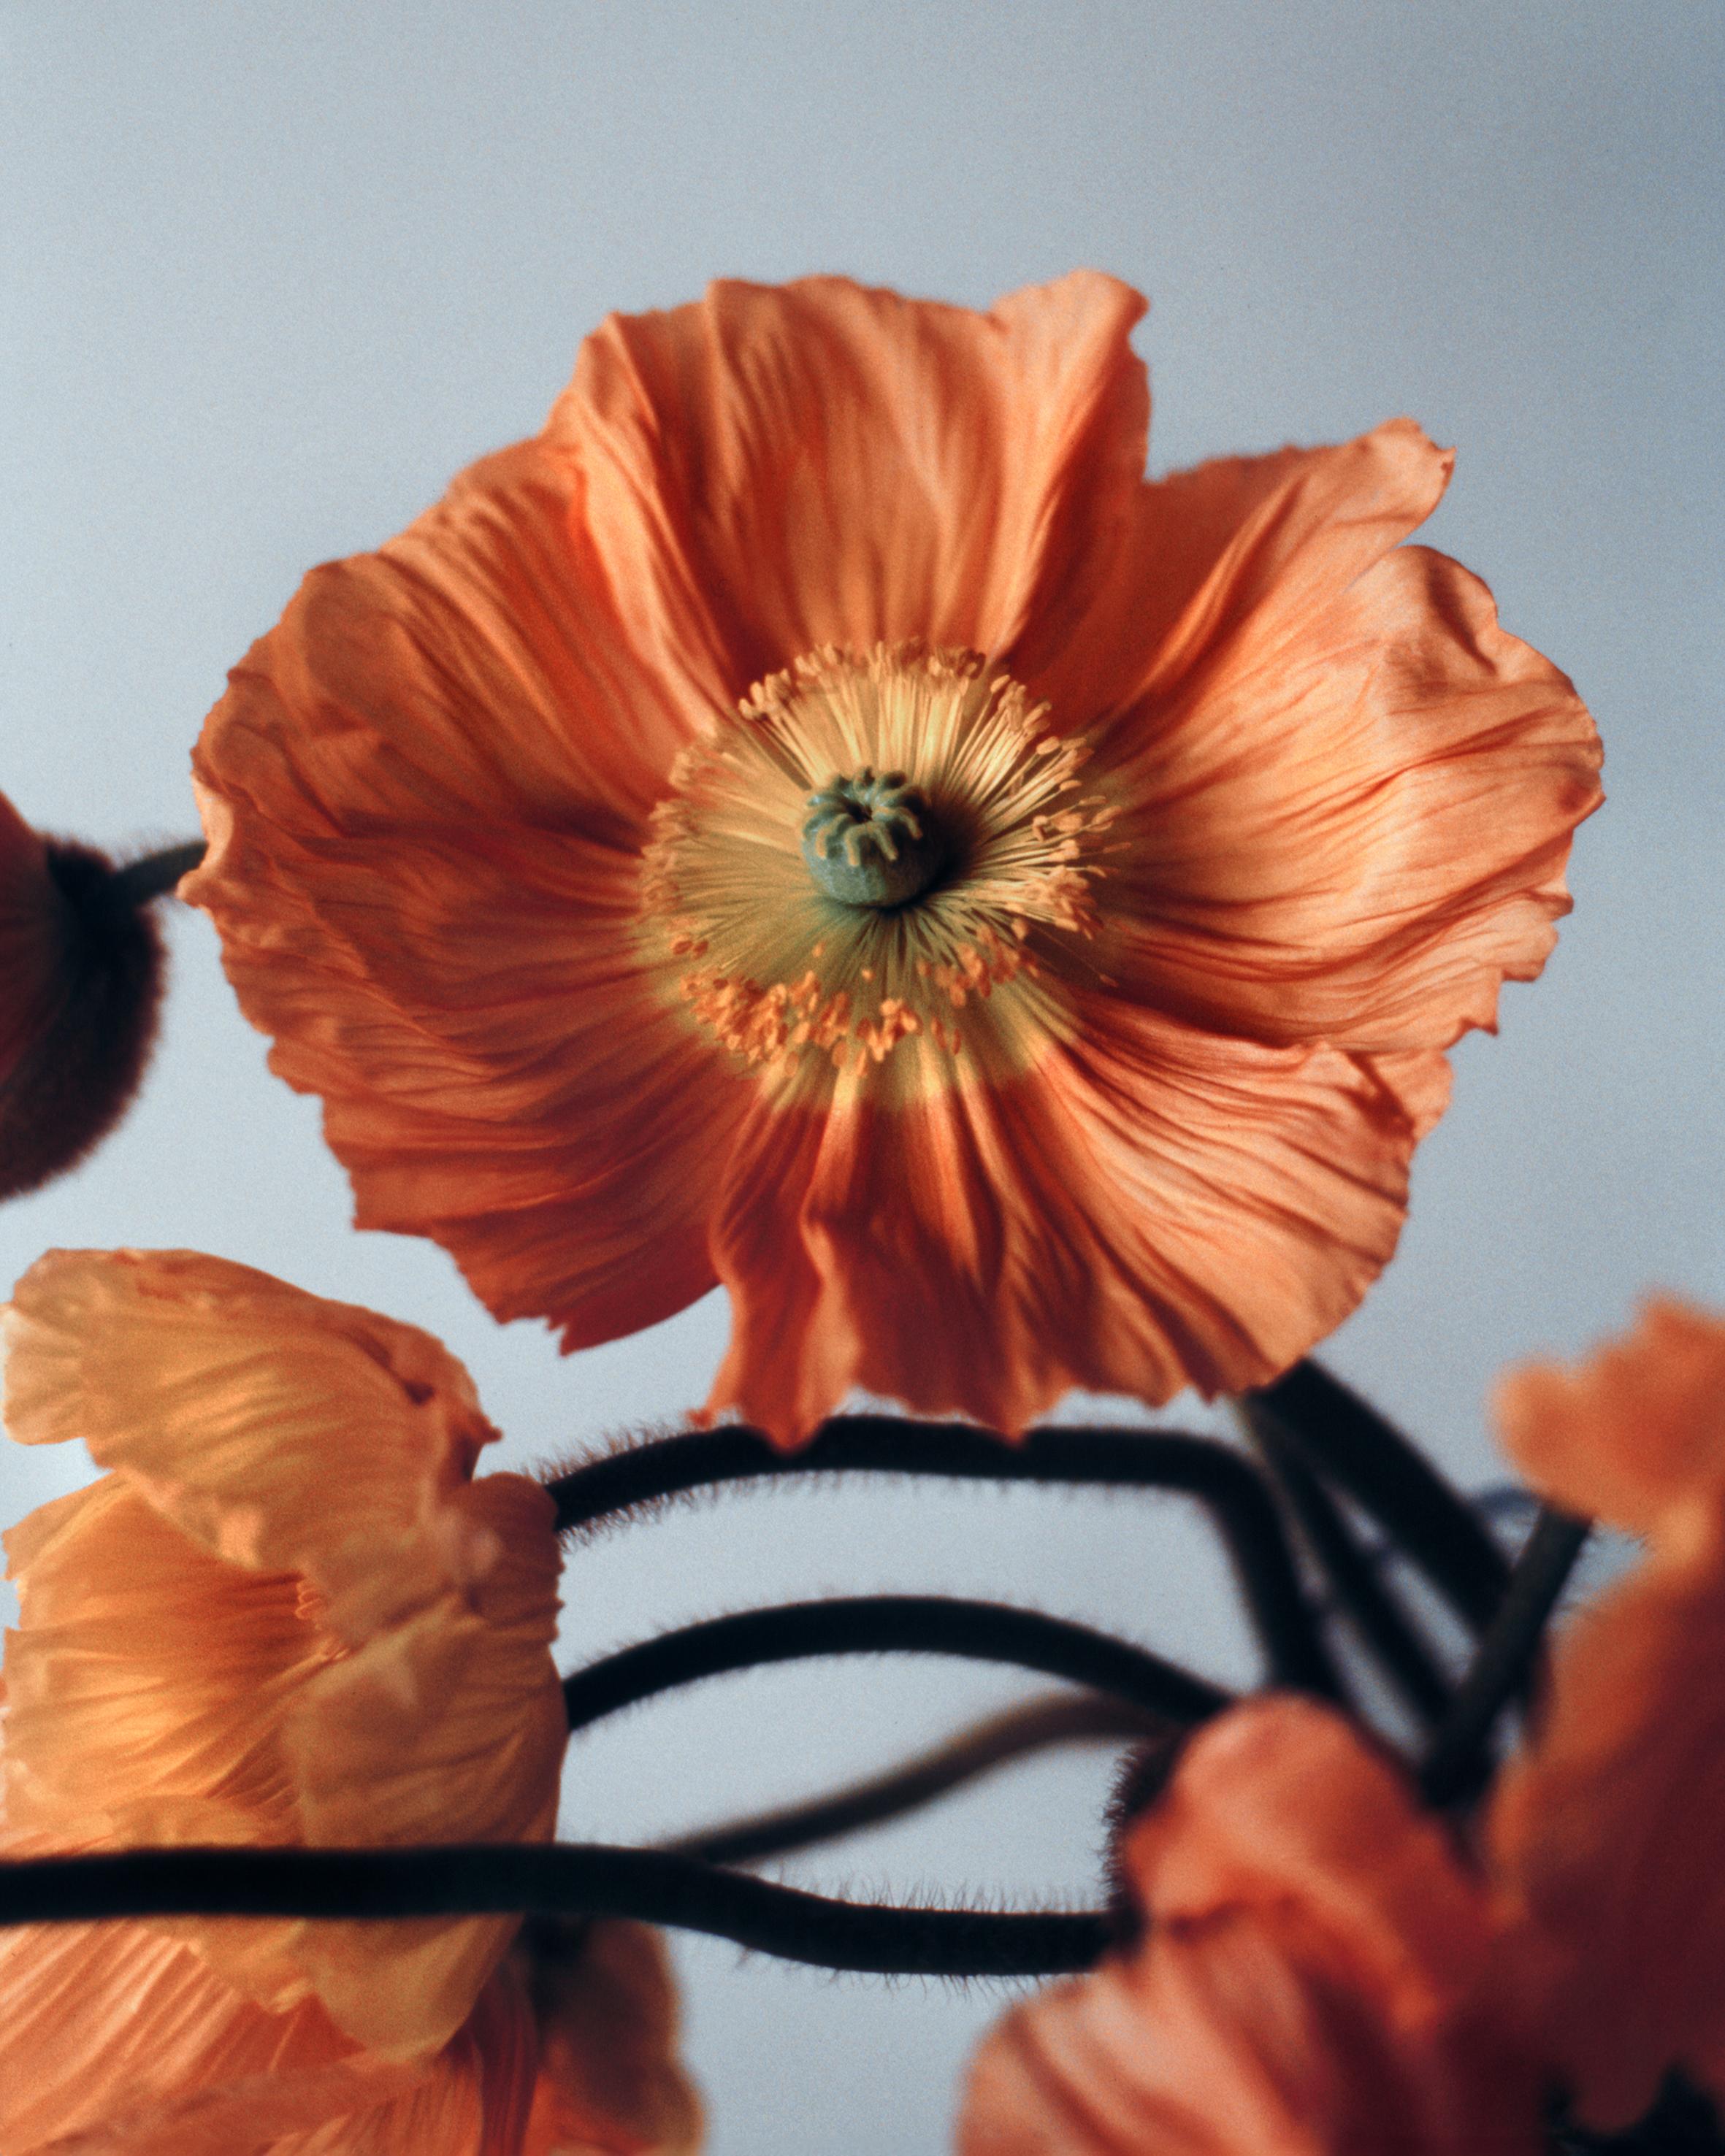 Ugne Pouwell Still-Life Photograph - Orange Poppies No.2 - Analogue floral photography, Limited edition of 20